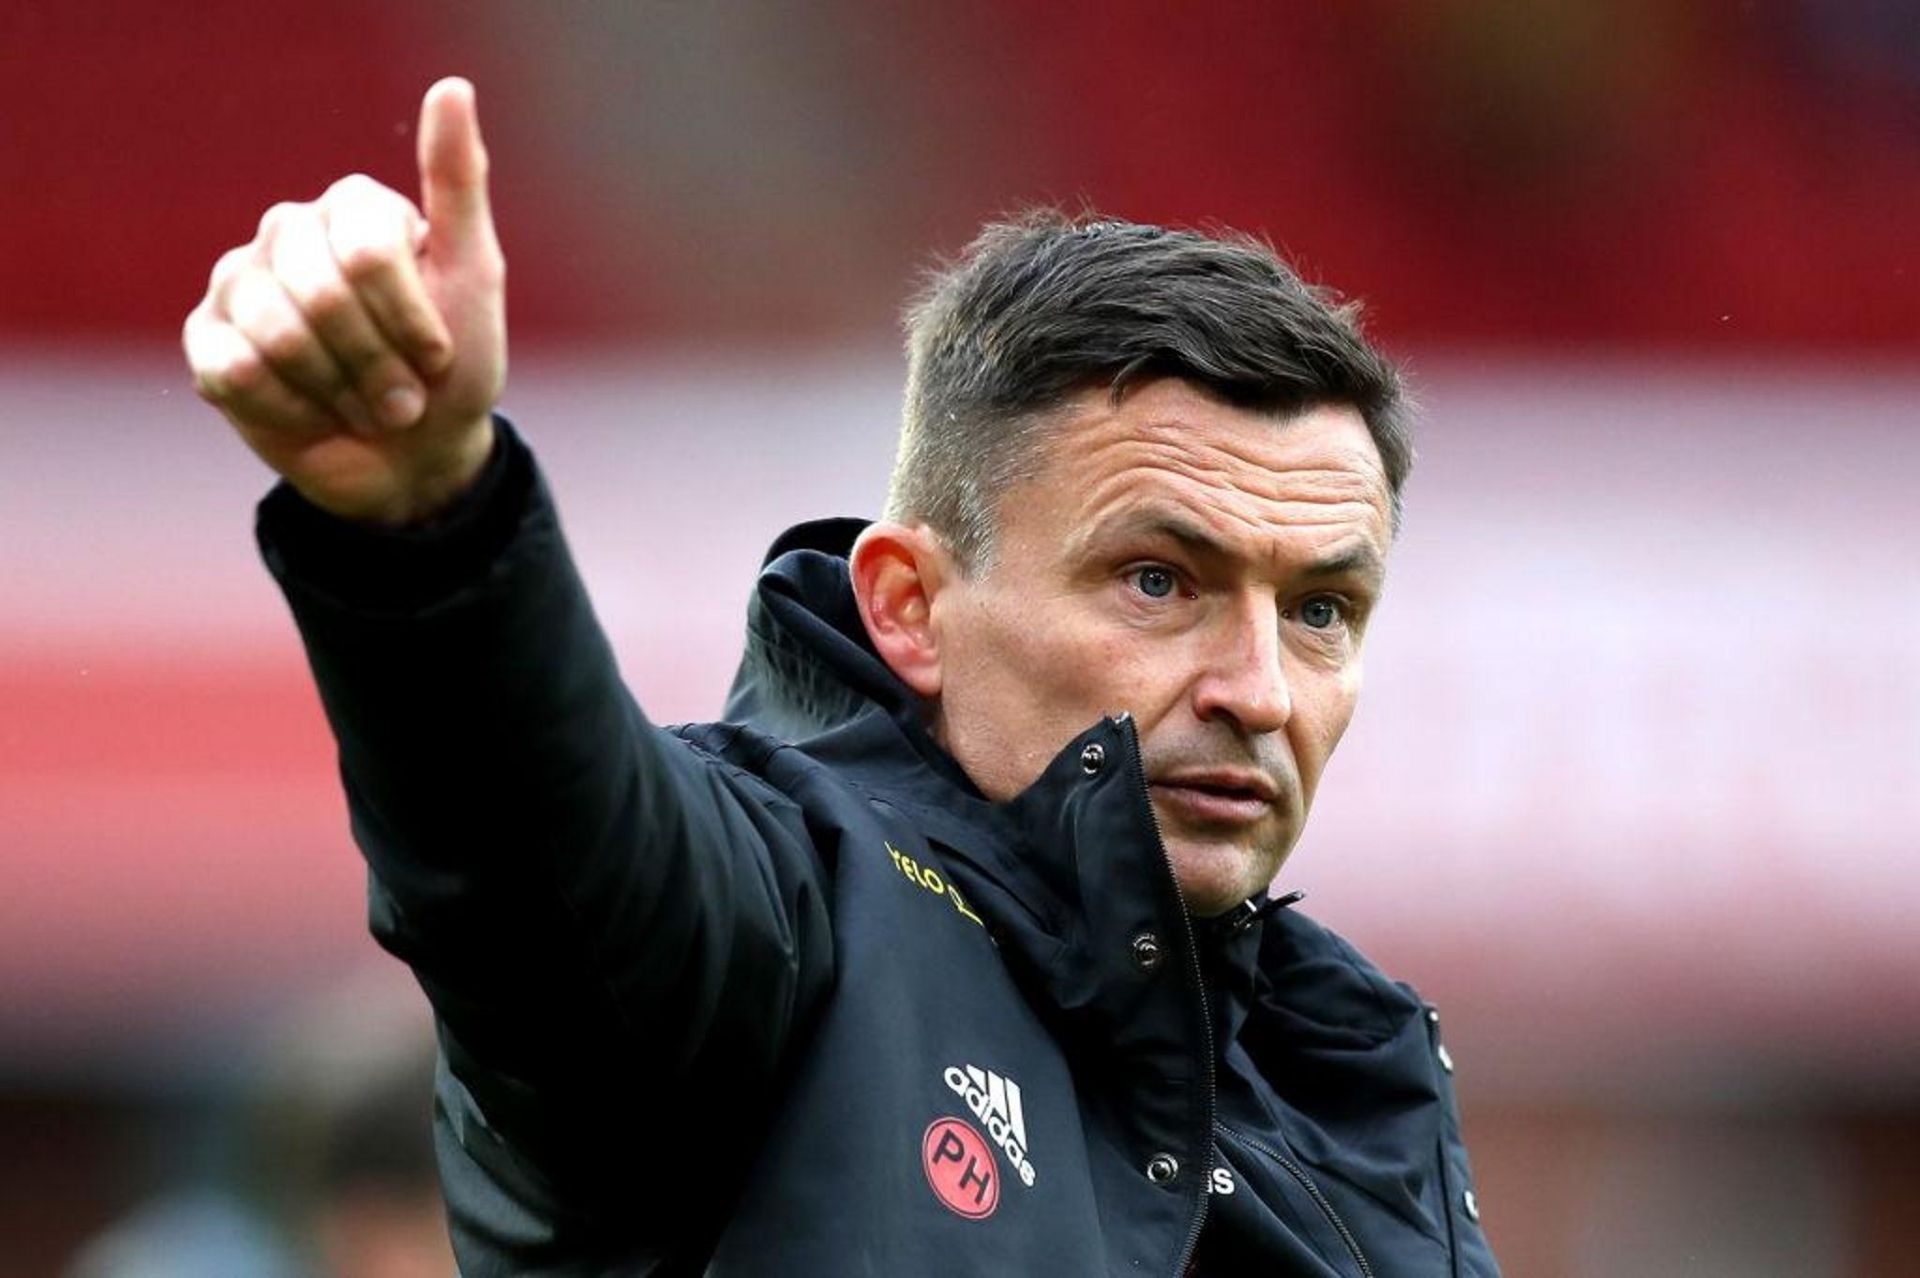 A thumbs up for Sheffield United: Paul Heckingbottom.